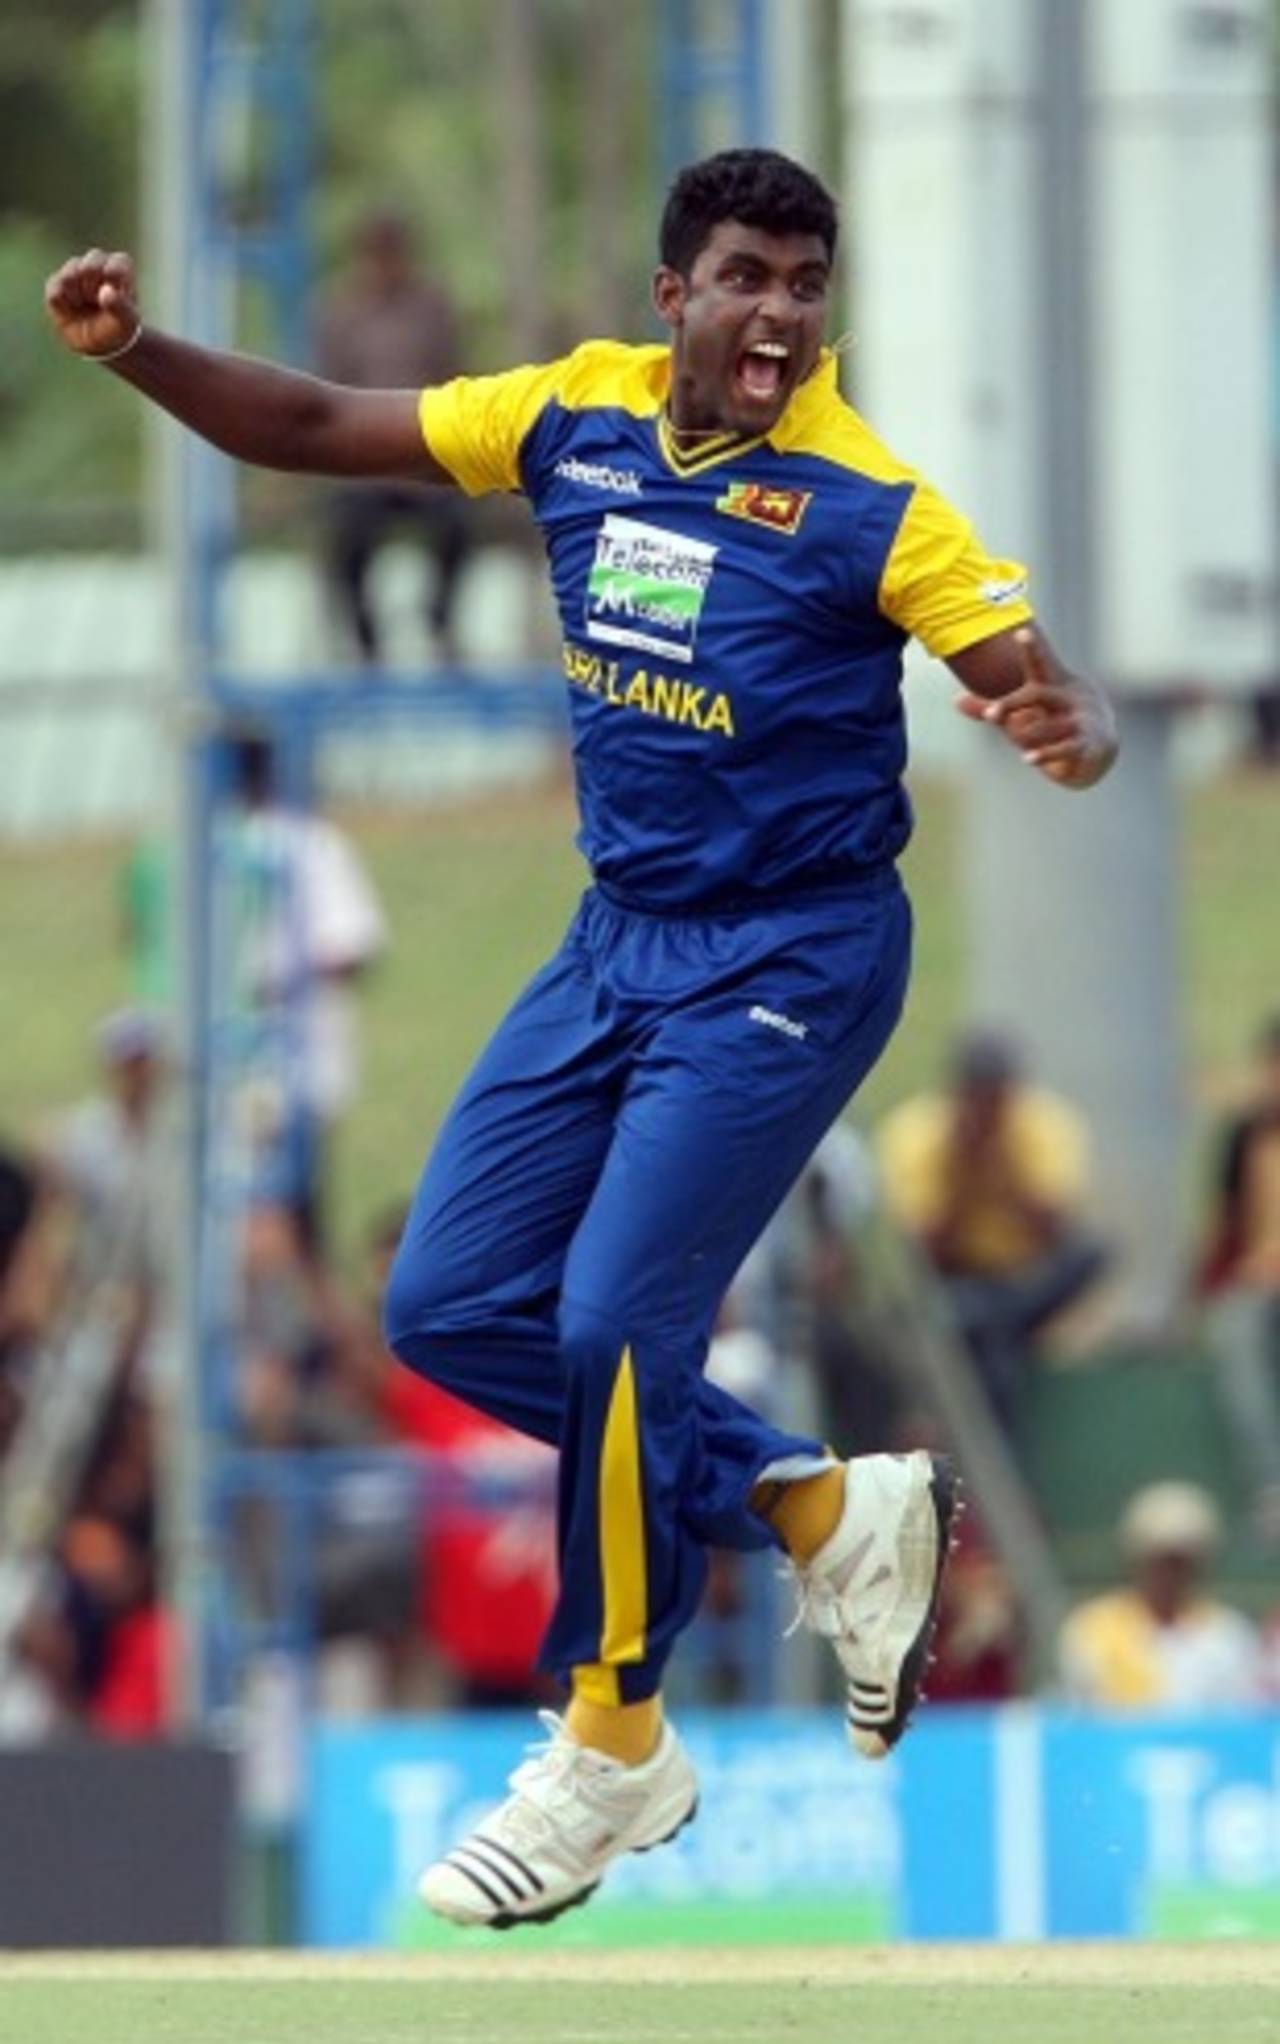 Thisara Perera's performance has intensified the competition for the slot of a fourth seamer in the line-up&nbsp;&nbsp;&bull;&nbsp;&nbsp;Cameraworx/Live Images